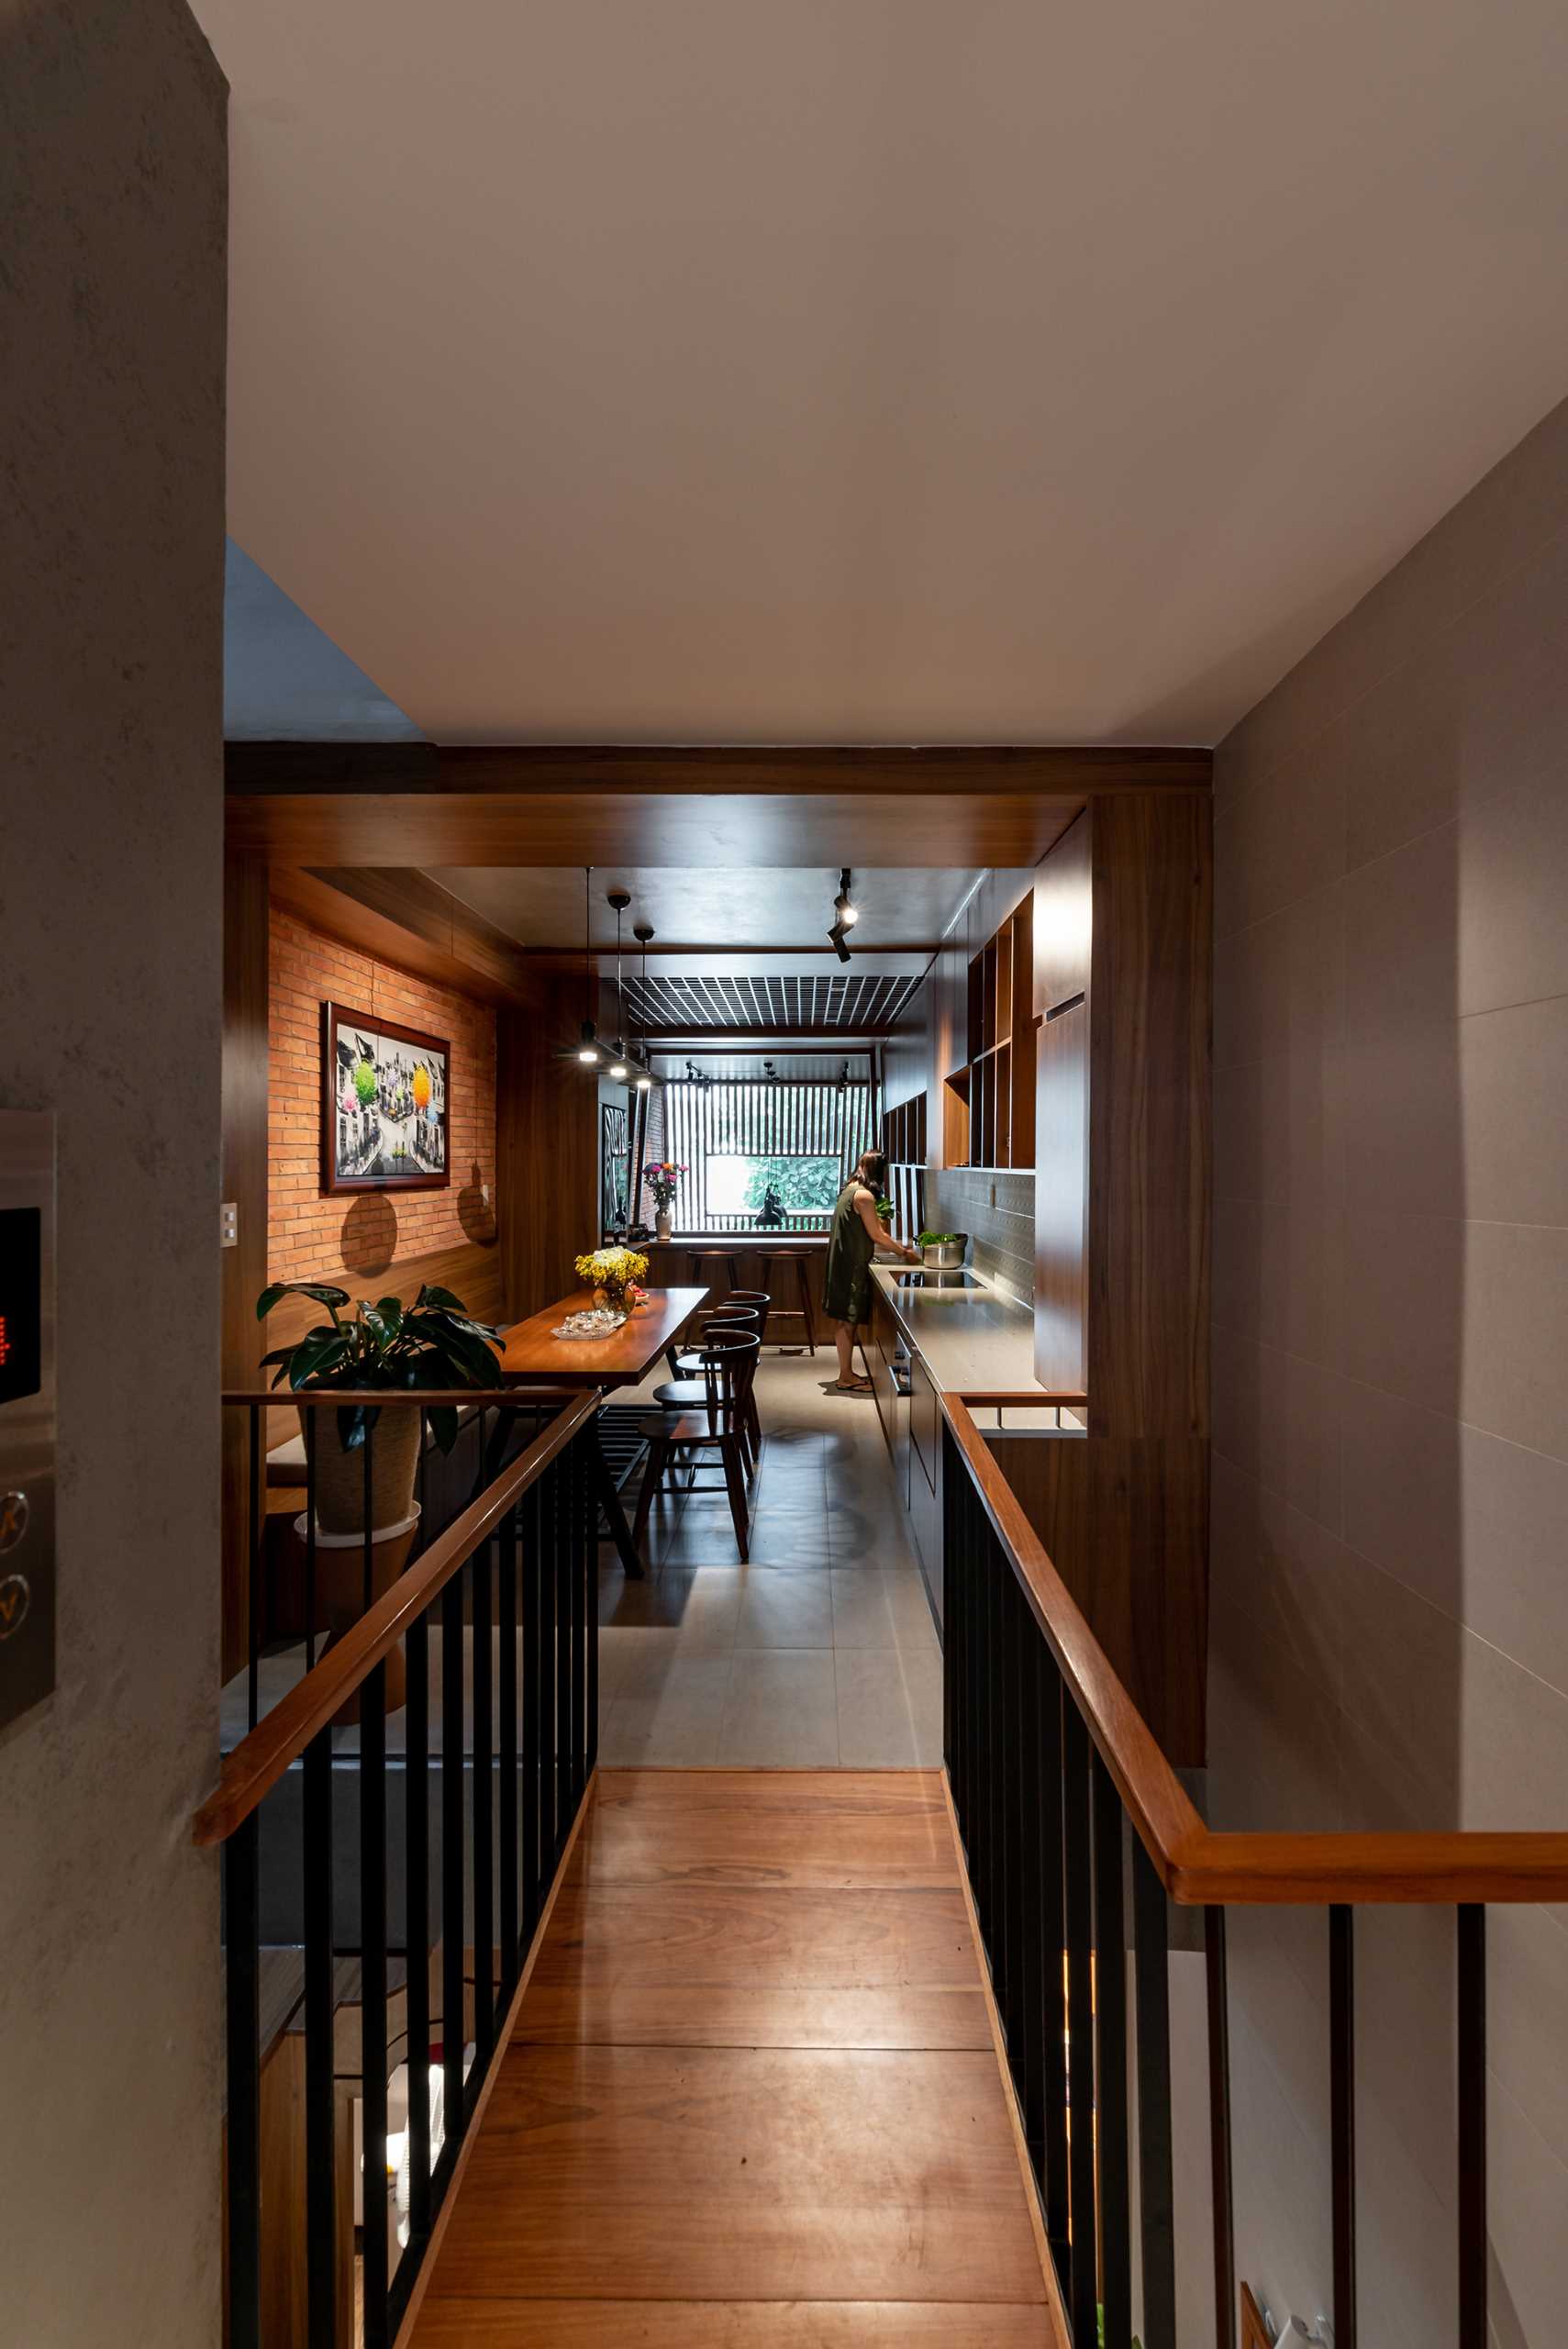 The mezzanine of this tall and skinny house, is home to the dining area and kitchen, has a skylight that can look down into the garage area and entrance hall so you can cook and look after the house at the same time.